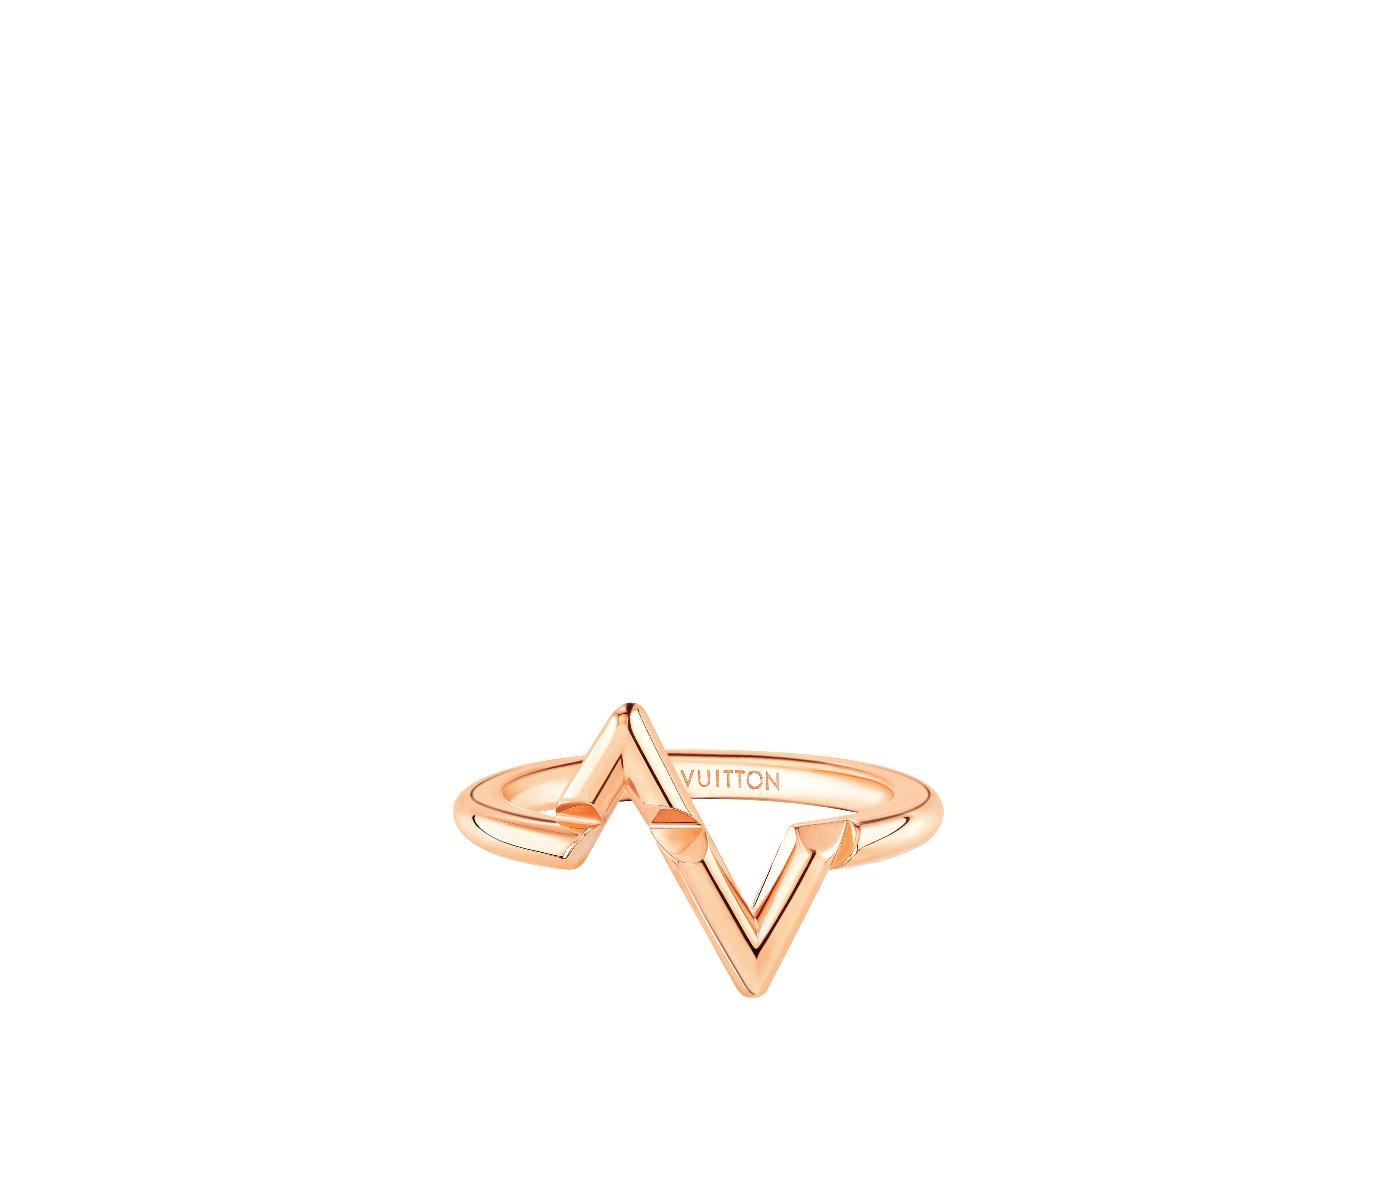 Ring by Louis Vuitton